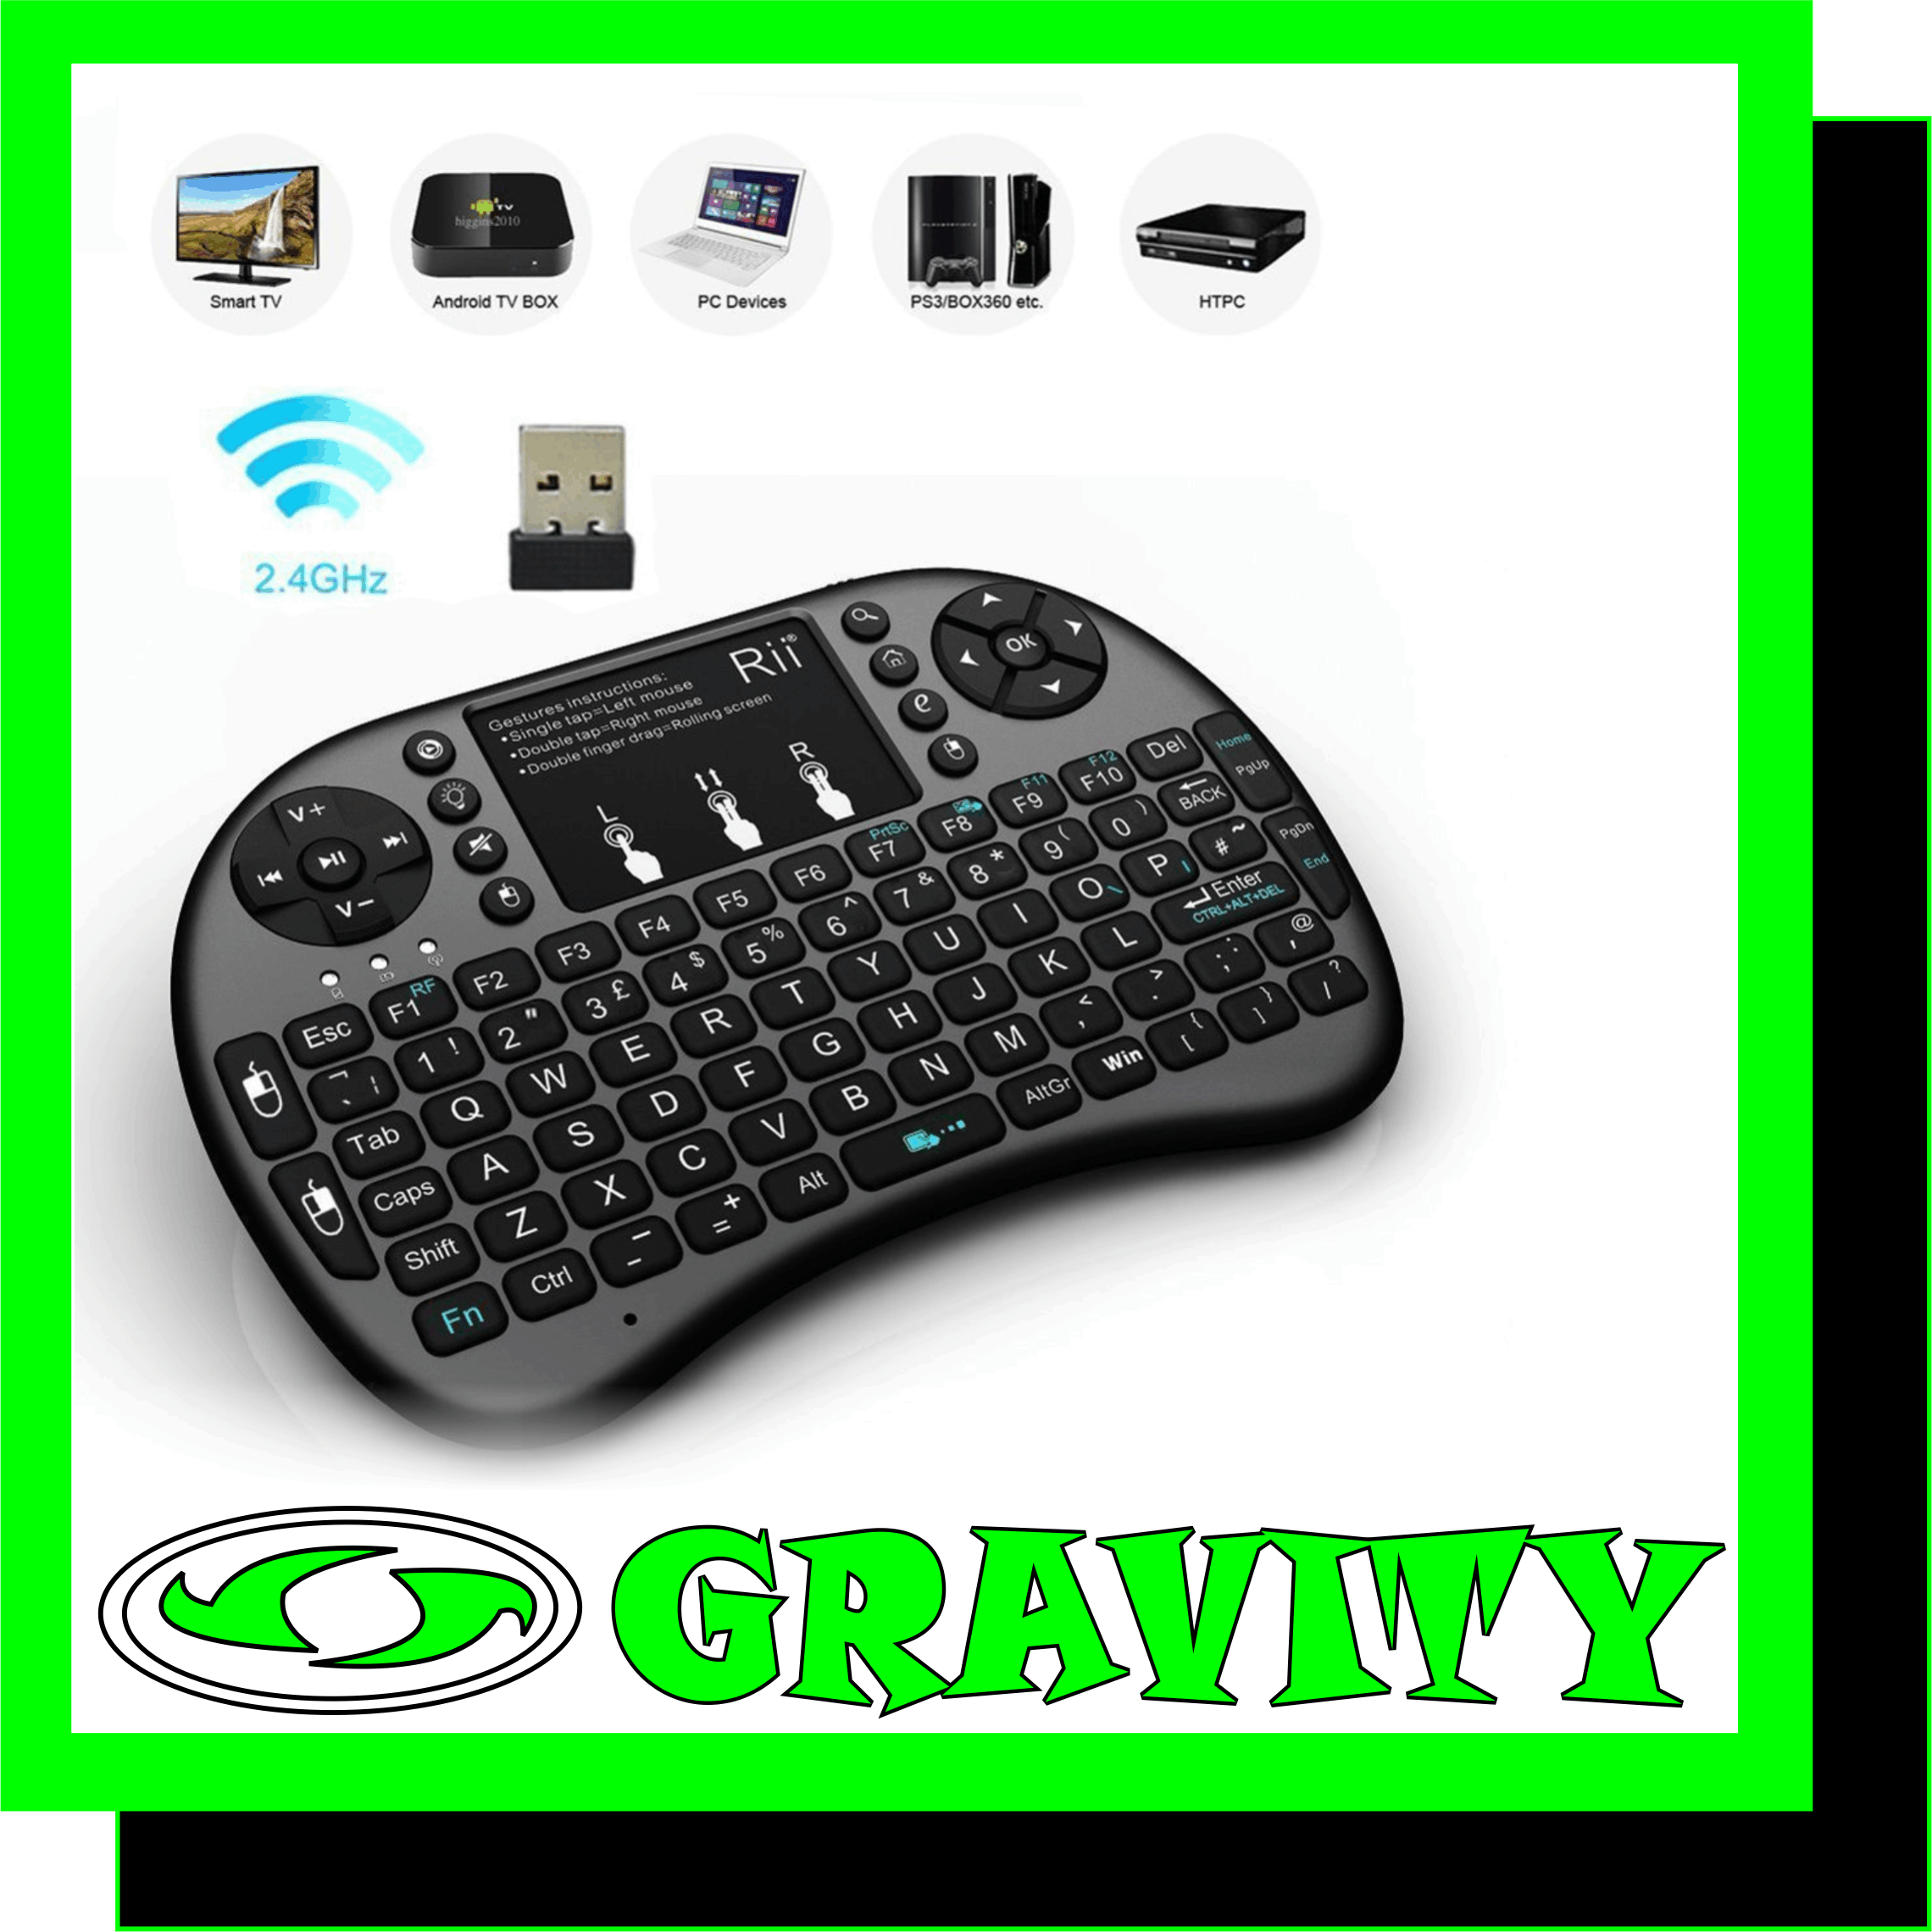 This is a mini 2.4GHz wireless keyboard and TouchPad combo, with USB interface receiver. It consists not only of normal wireless keyboard keys but also of multimedia control keys and PC game control keys. Plug and play, simple and smooth. The mini-keyboard ensures convenient typing, and you can control your devices on your sofa.   Features:  [Multifunction Combo] Wireless keyboard, touchpad mouse . Compatible with PC, Notebook, Smart TV, Android TV BOX, etc.  [2.4GHz Wireless Connection] With the included USB interface adapter, no driver, plug and play is required. 2.4GHz wireless connection, enjoy wireless control up to 10 meters.  [Backlight Function]Very easy and convenient to use the keyboard in the dark. Blue, Green, Red, three types of backlight can be toggled freely (Fn + F2).  [High sensitivity touchpad] Easy to operate the left mouse (single finger touch), right mouse (two finger touch) and the rolling screen (drag two fingers). Touchpad DPI adjustable functions.  [92 Keys Keyboard] Consists of normal wireless keyboard keys, multimedia control keys, and PC game control keys. The keyboard also features the sleep mode and self-alarm clock. 